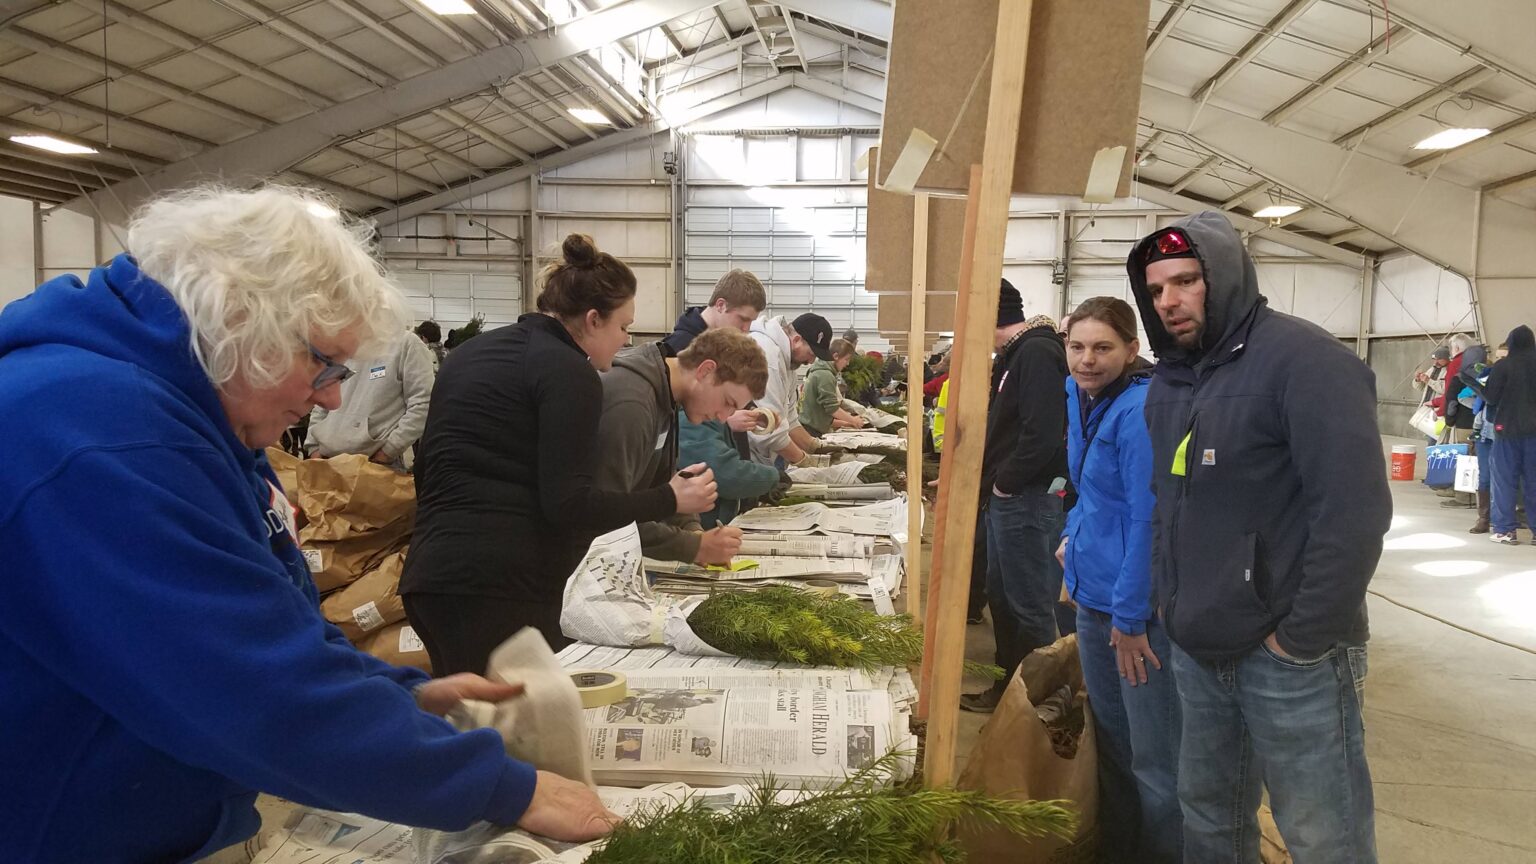 Pre-ordered seedlings are wrapped up by volunteers while onlookers watch.